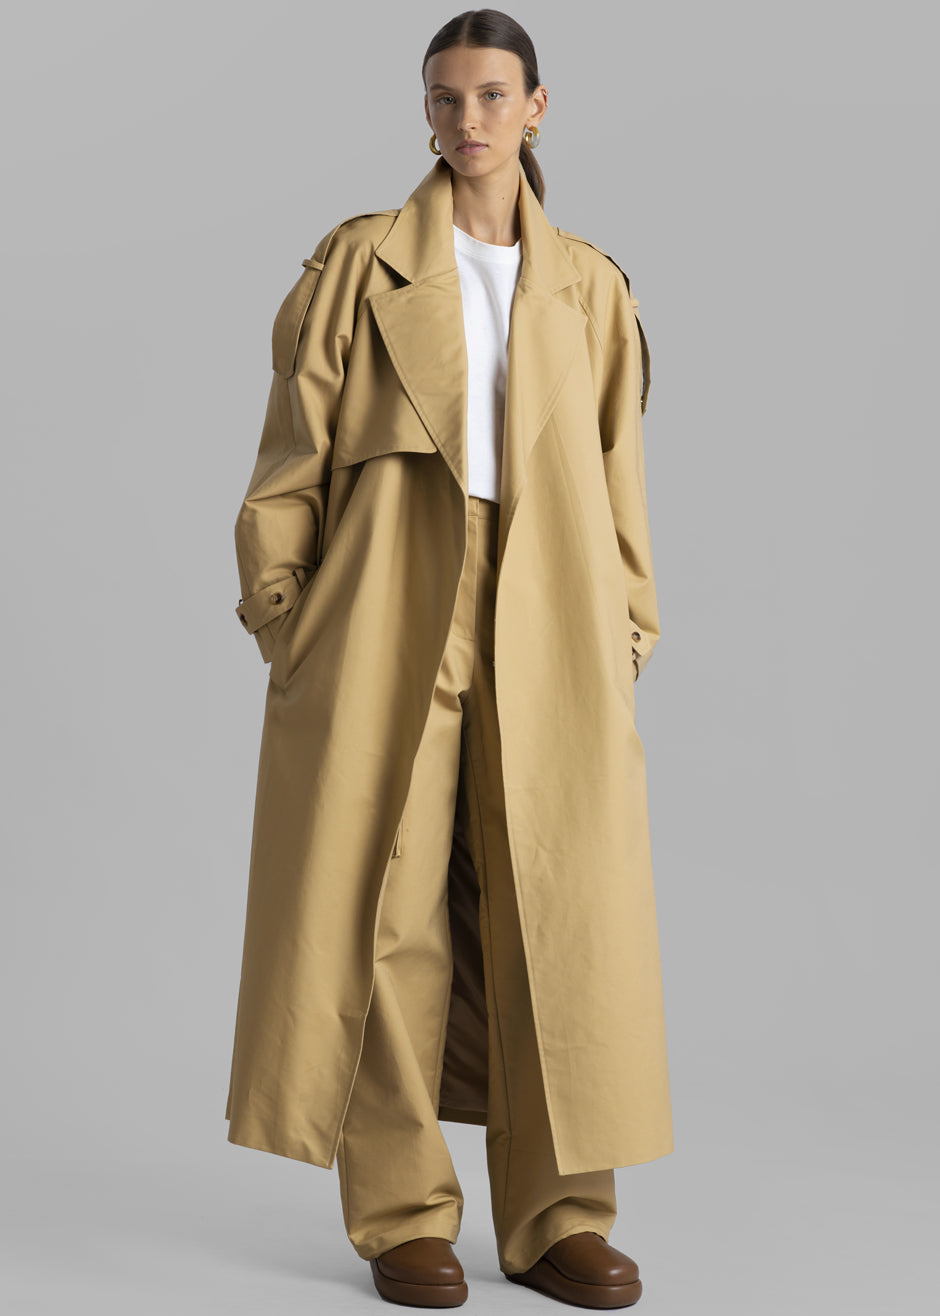 Suzanne Trench Coat - Beige - 1